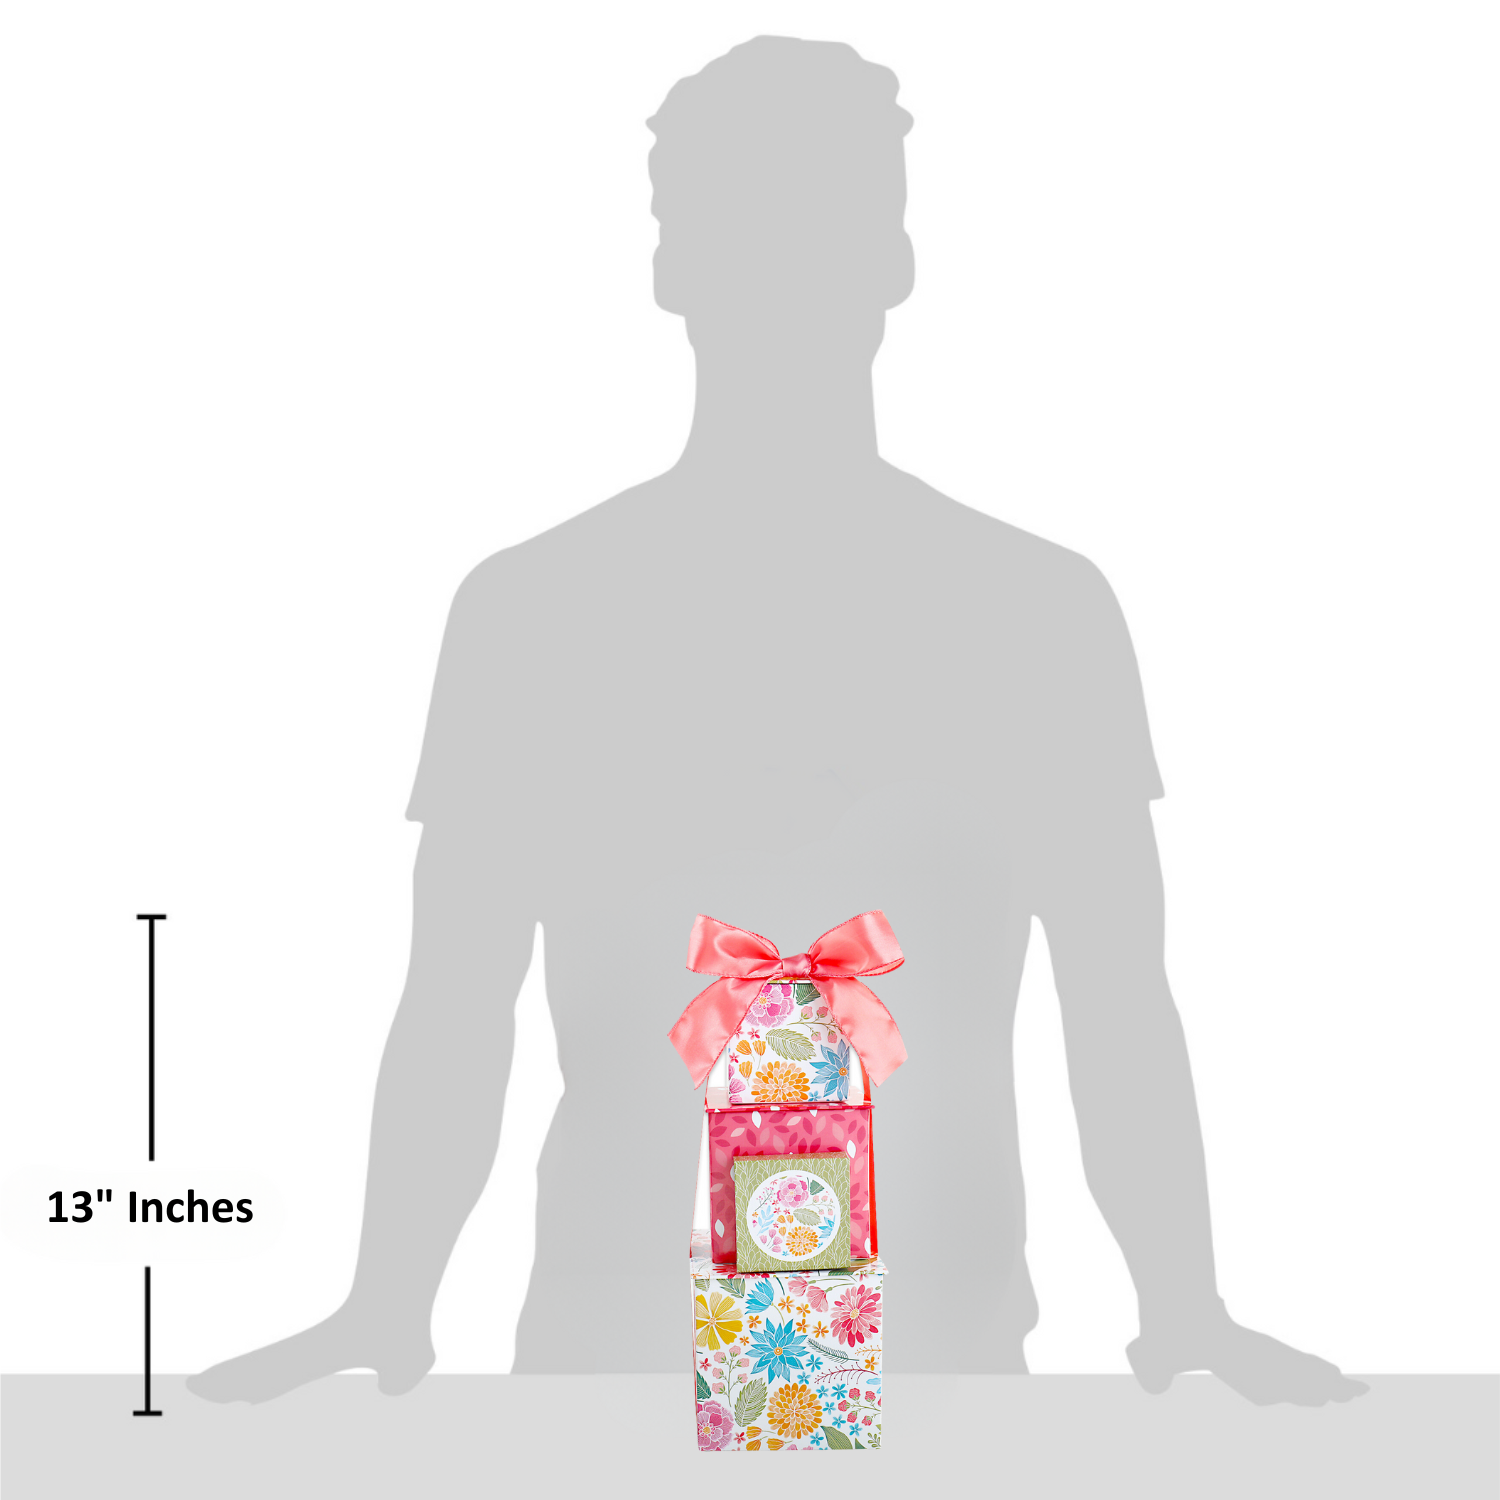 gift tower displayed in front of grey man figure to illustrate size